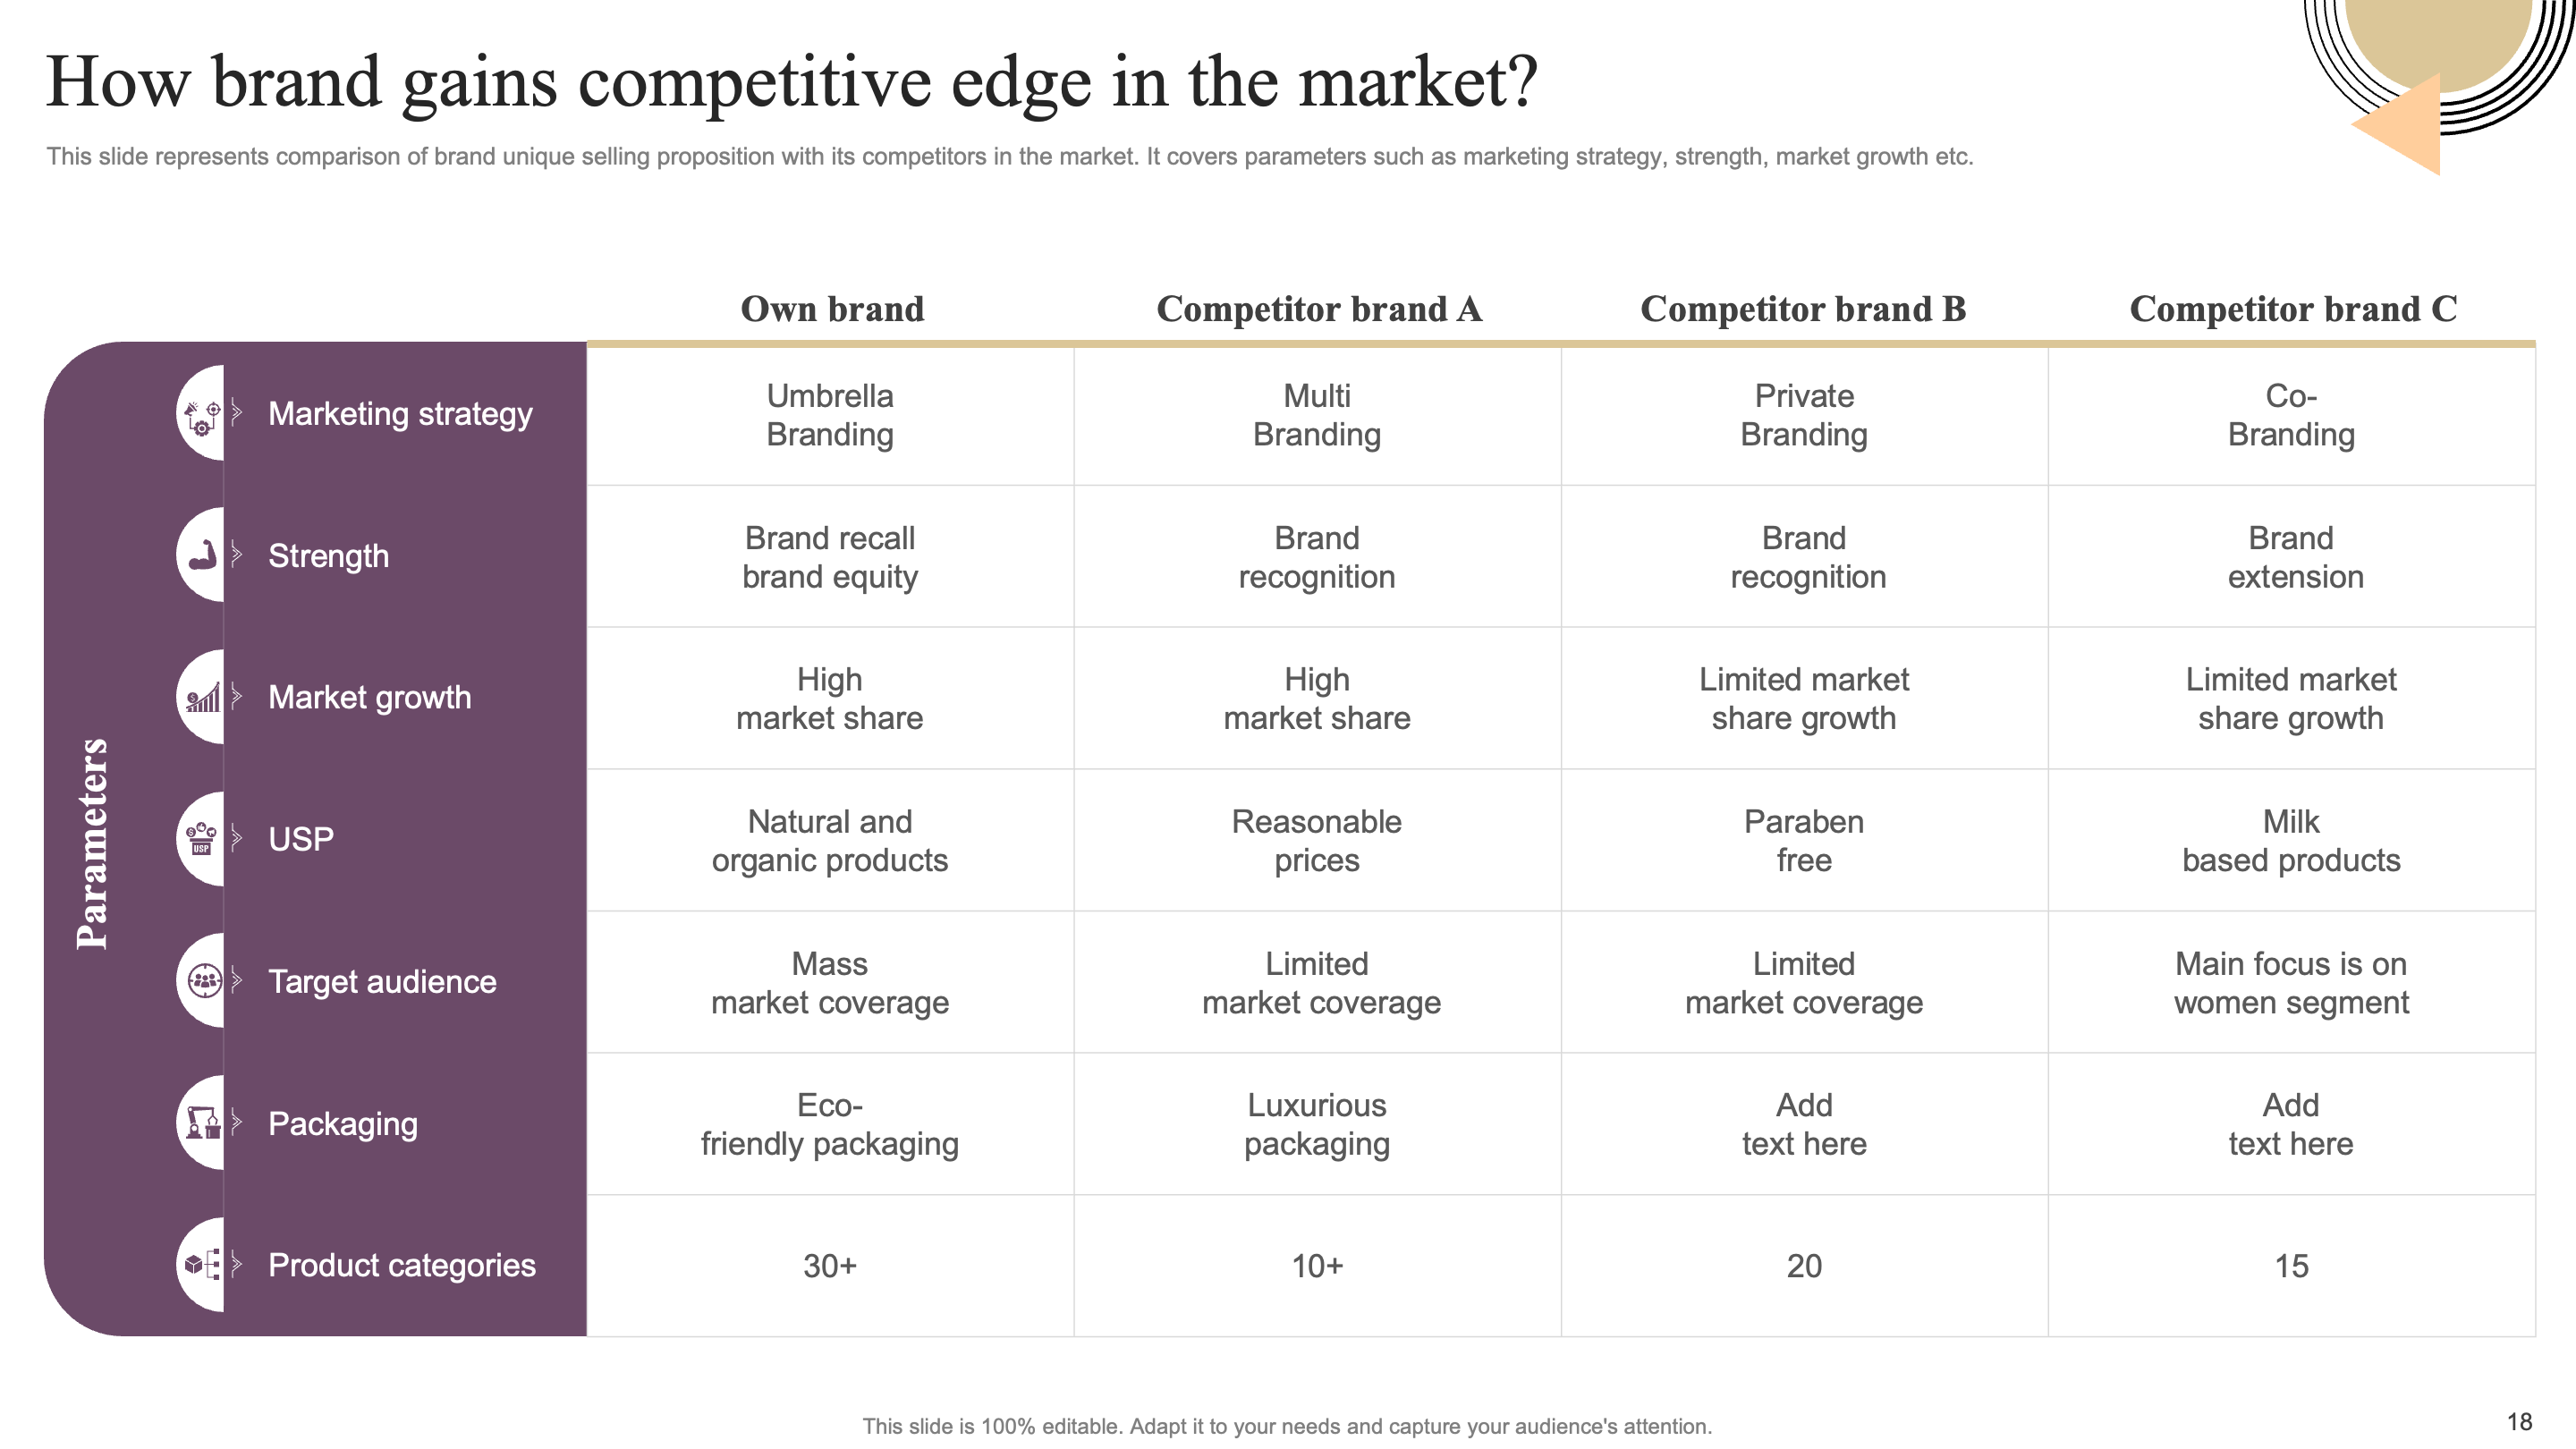 How Brand Gains Competitive Edge in the Market?